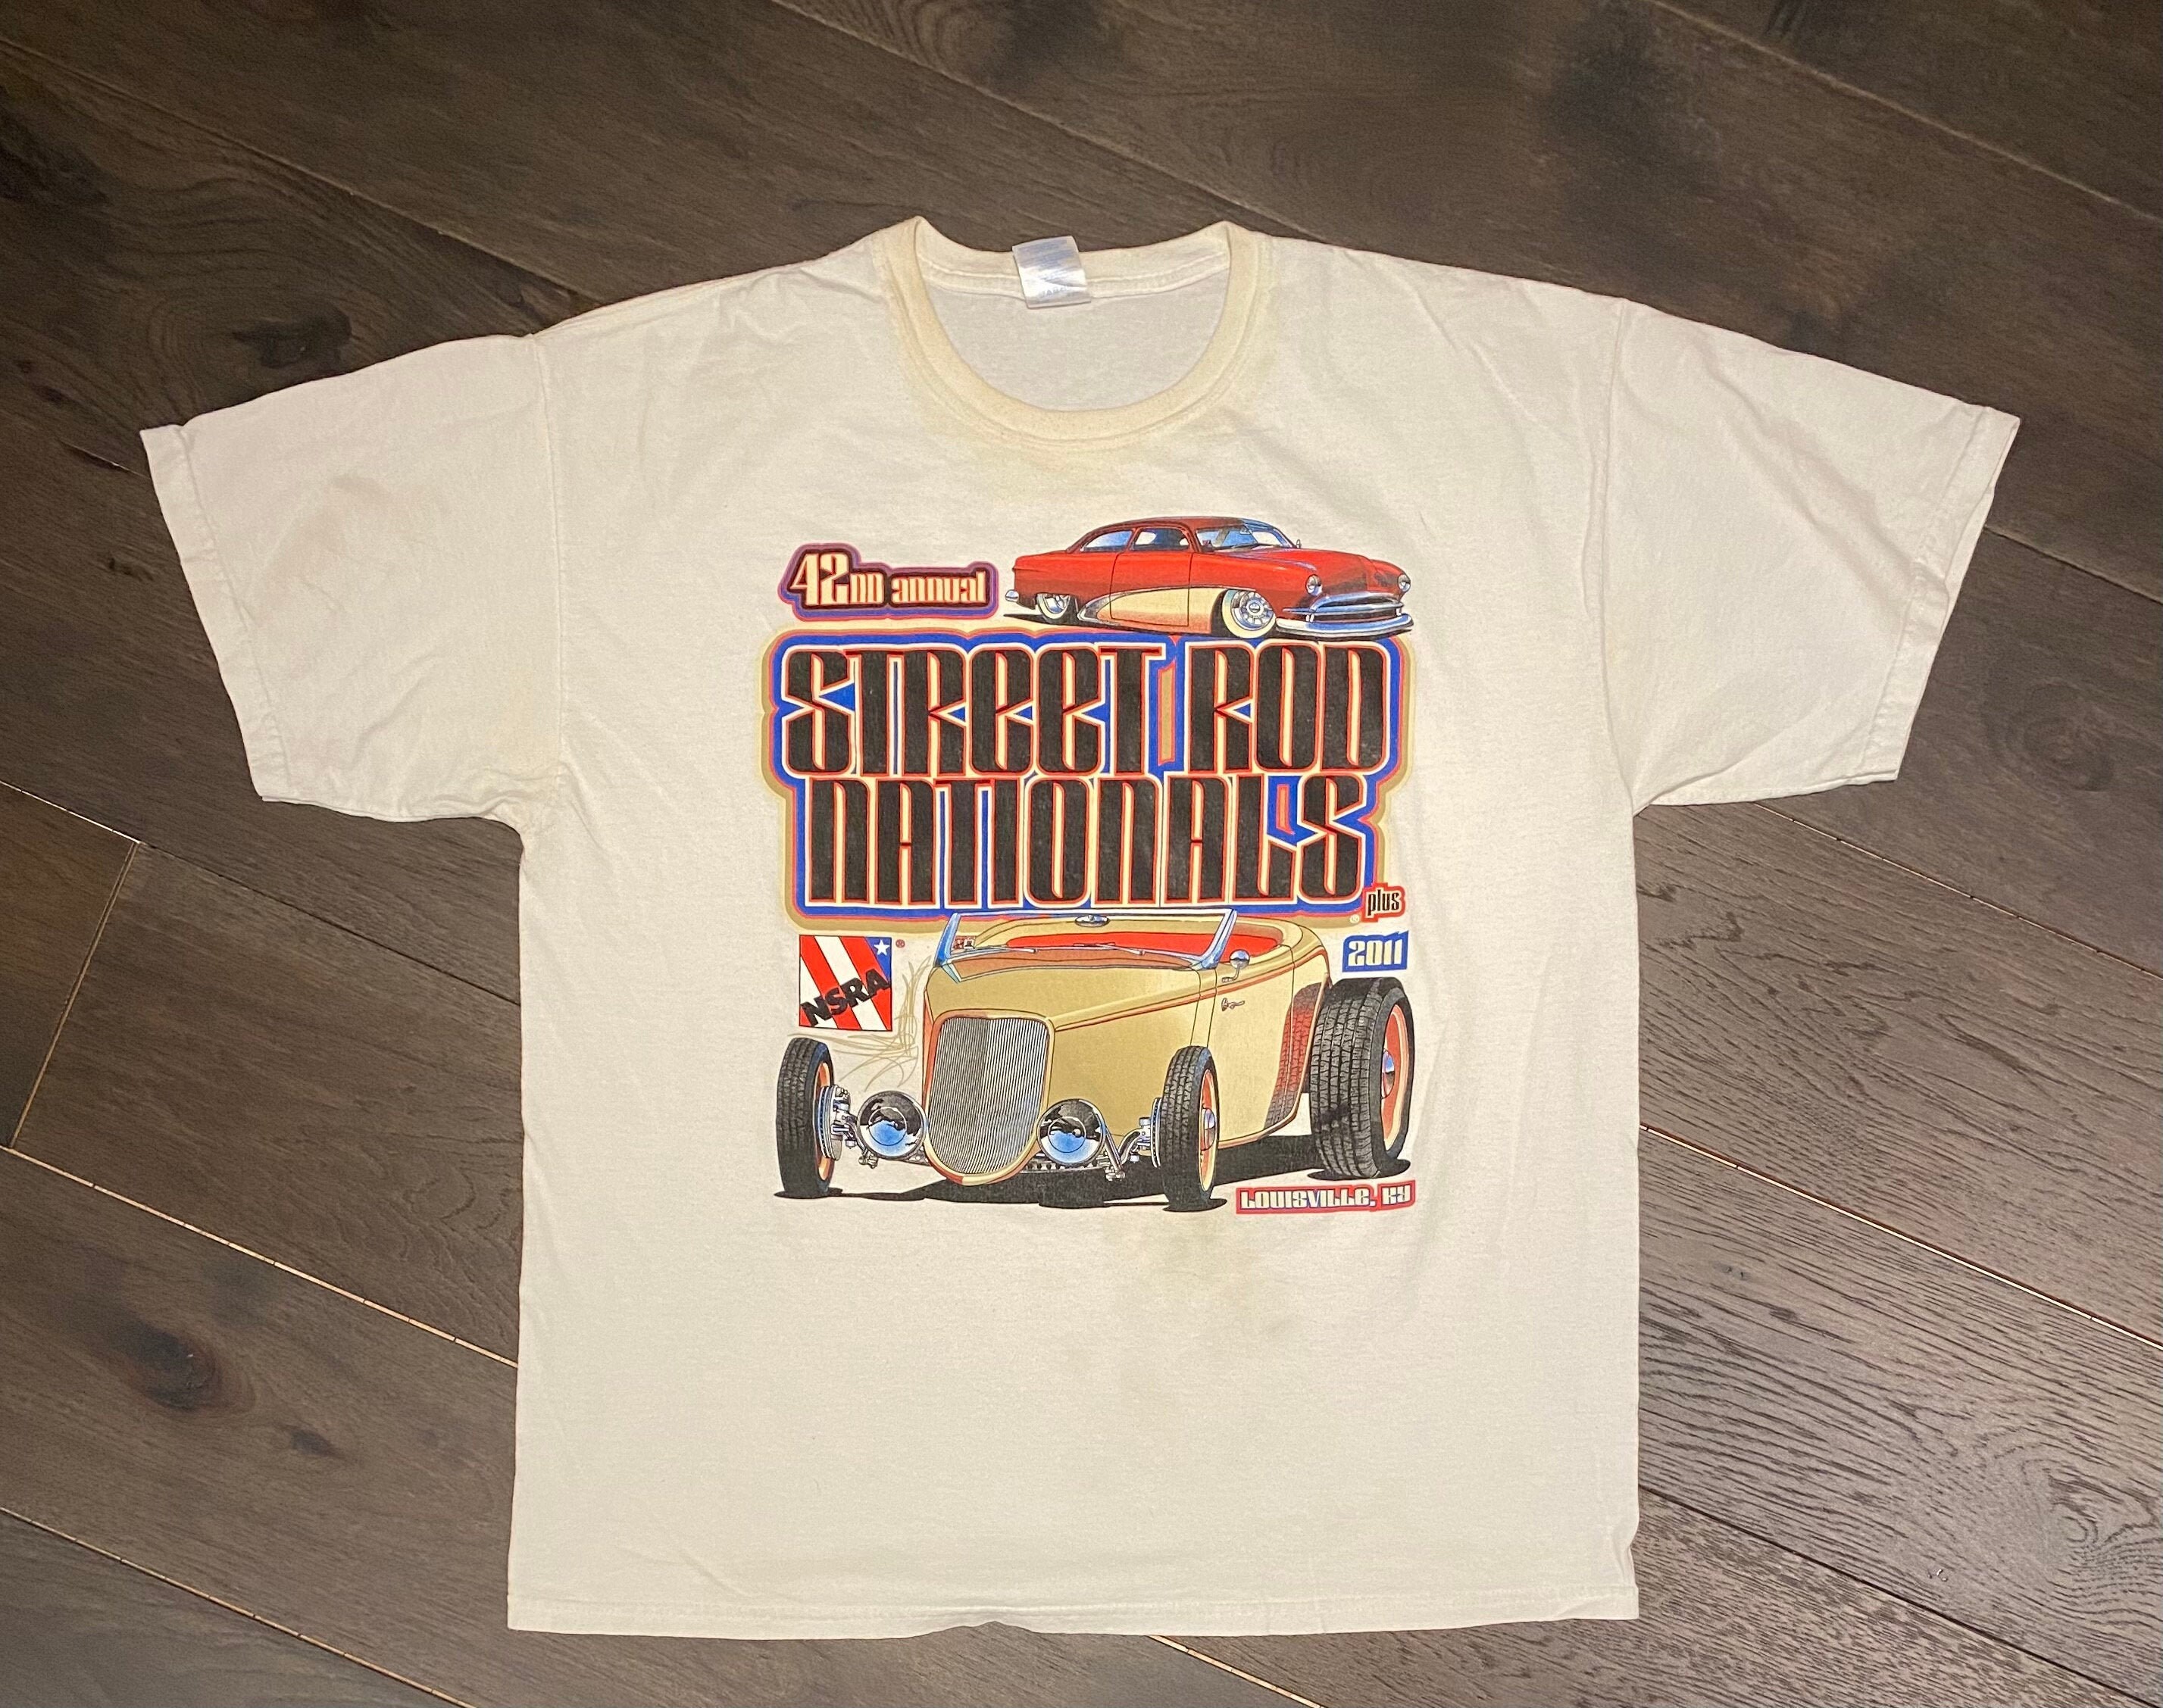 Street Rod Nationals Graphic Tee Size XL Vintage 2000s | Etsy